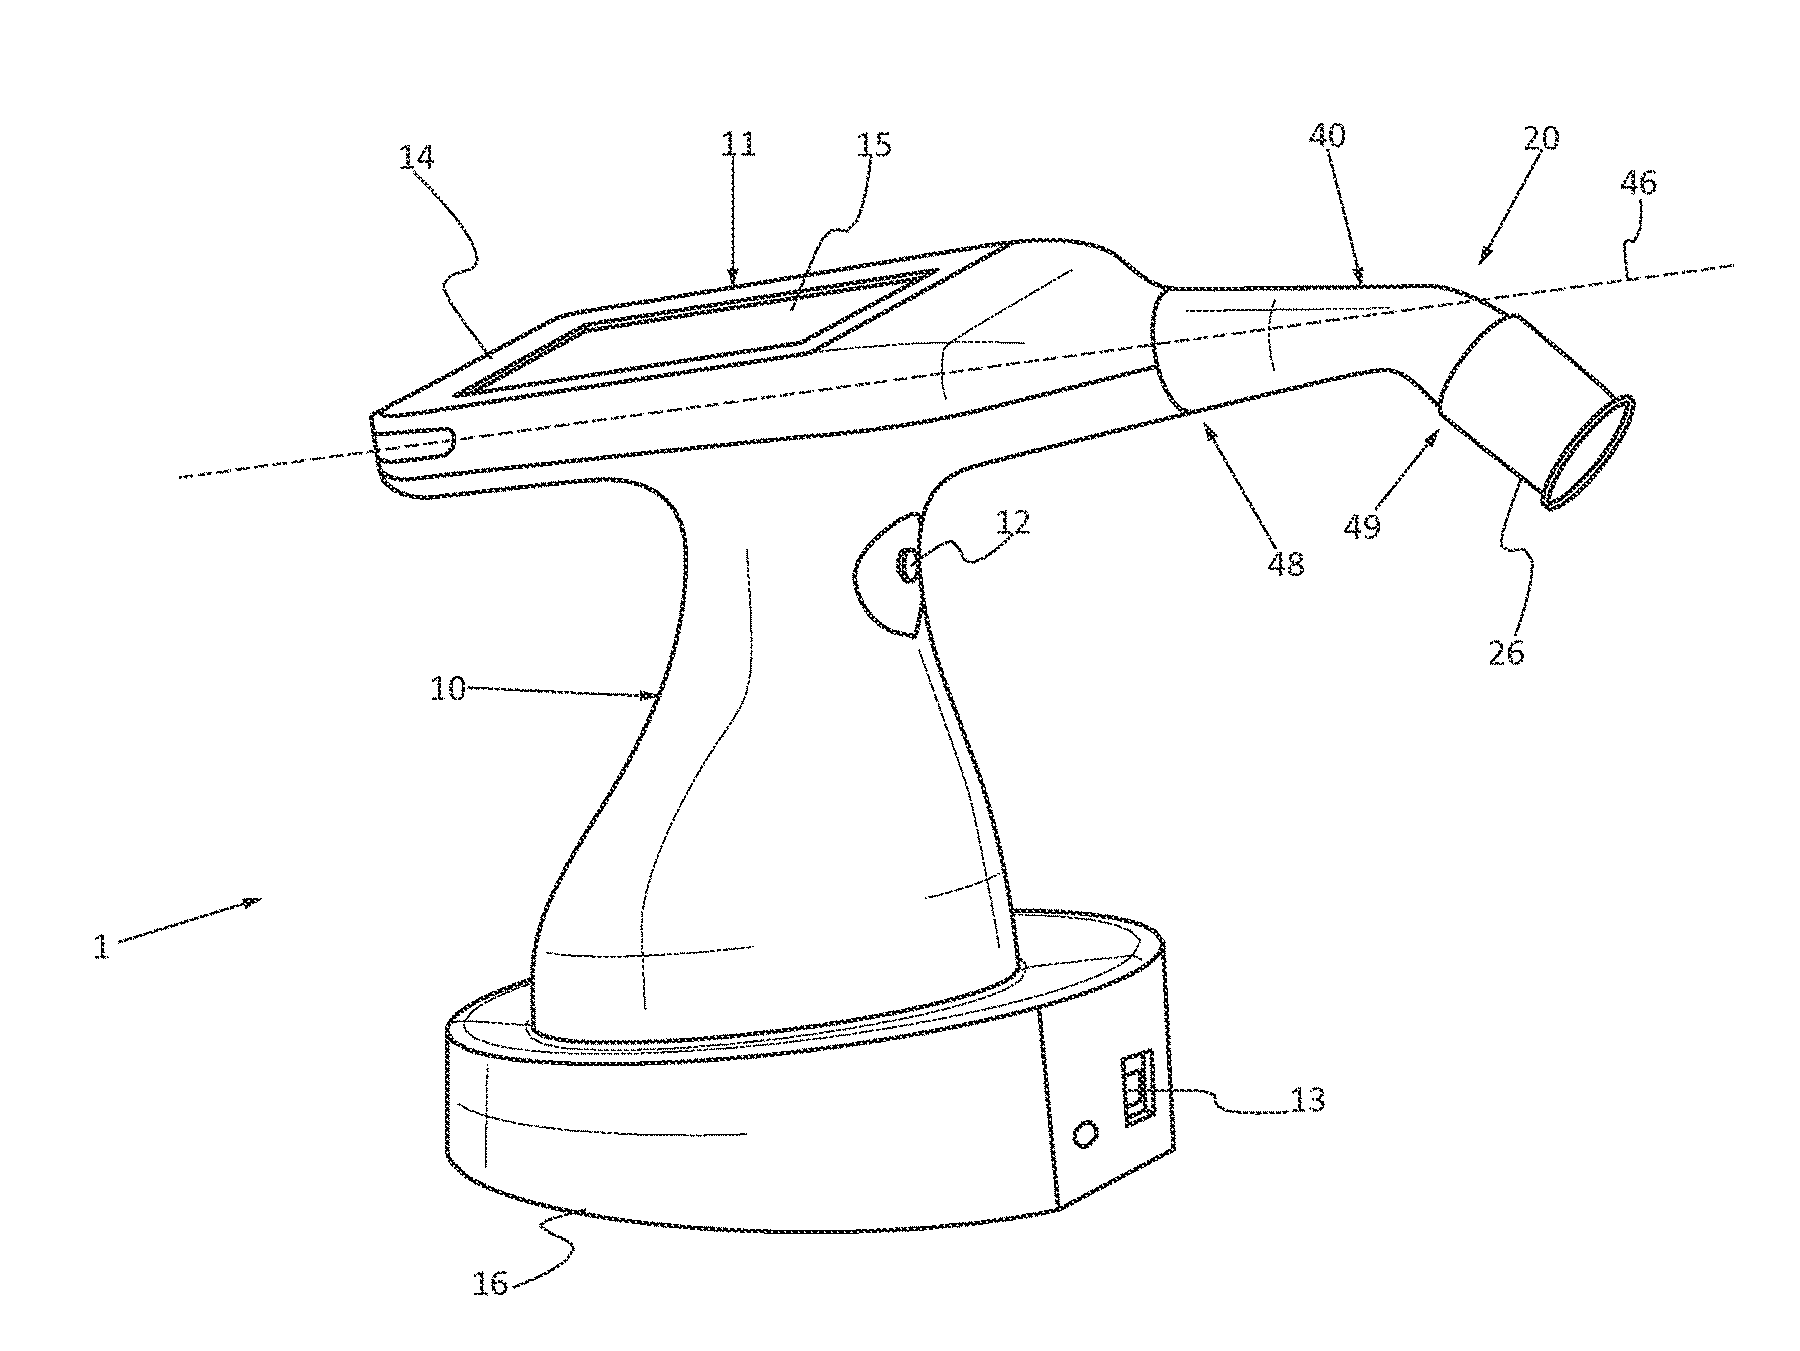 Method And Device For Manufacturing And Controlling The Conformity Of A Dental Prosthesis From Parameters Obtained With A Shade Selecting Device